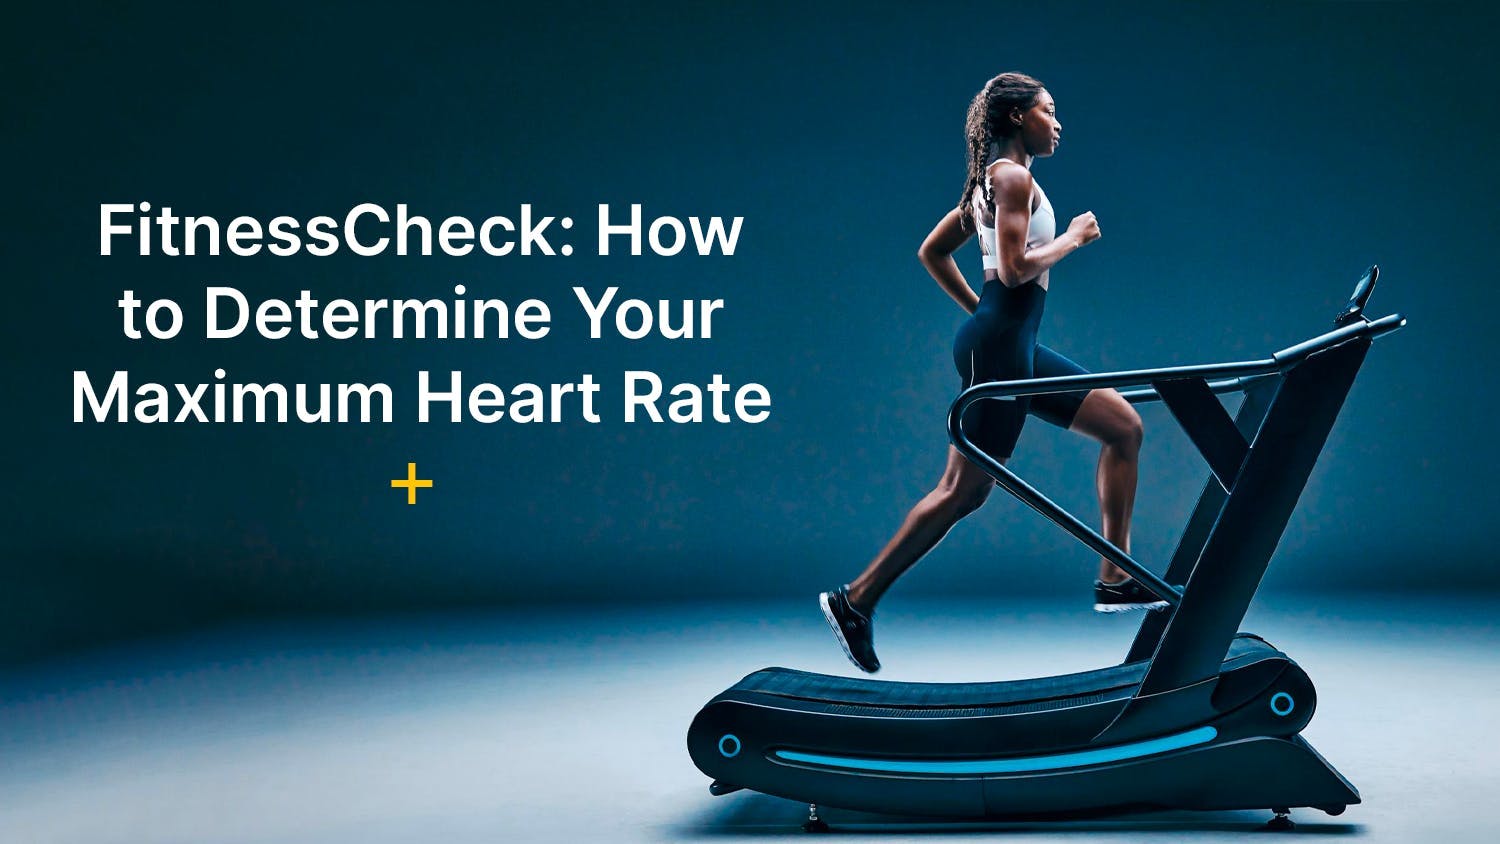 fitnesscheck-how-to-determine-your-maximum-heart-rate